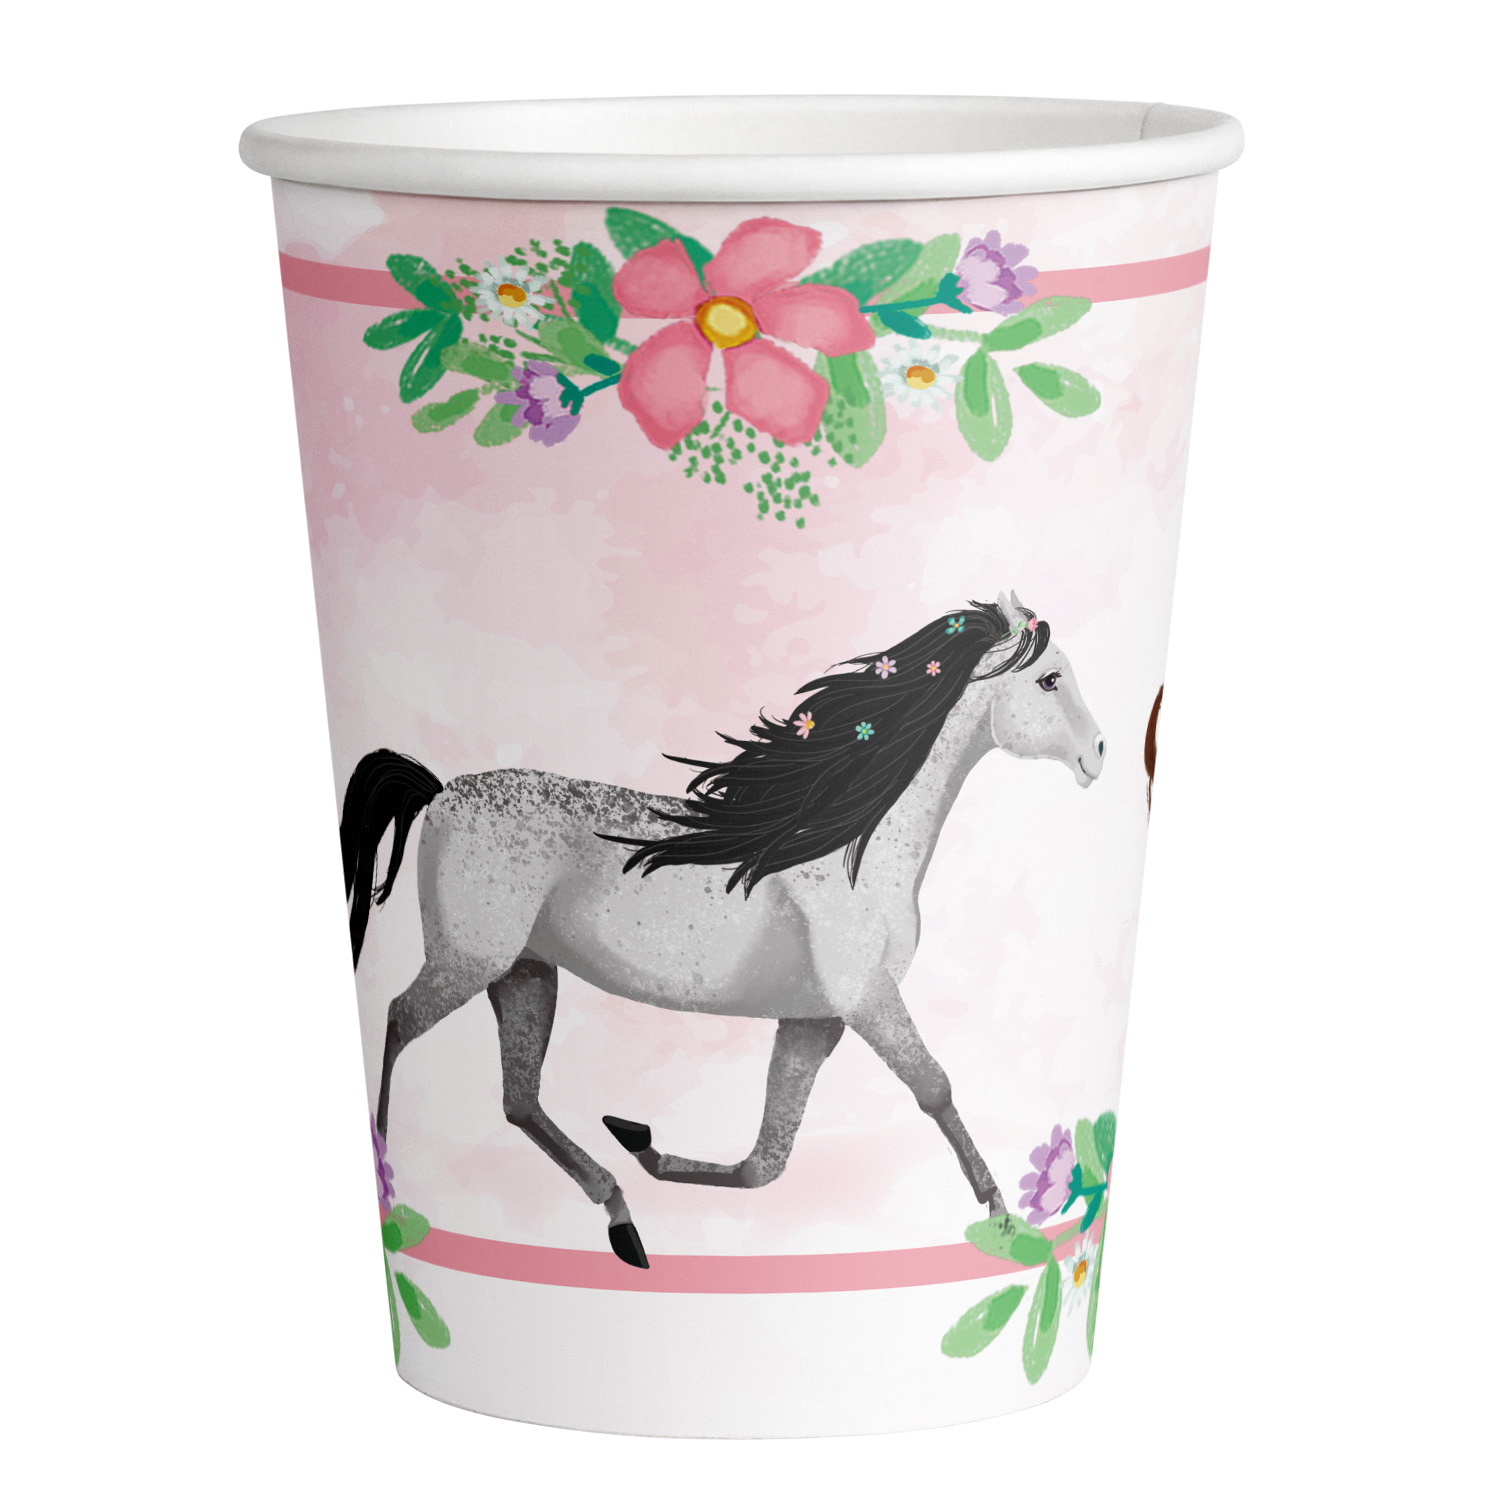 8 Charming Horse Party Cups|Horse /& Pony Party|Paper Party Cups